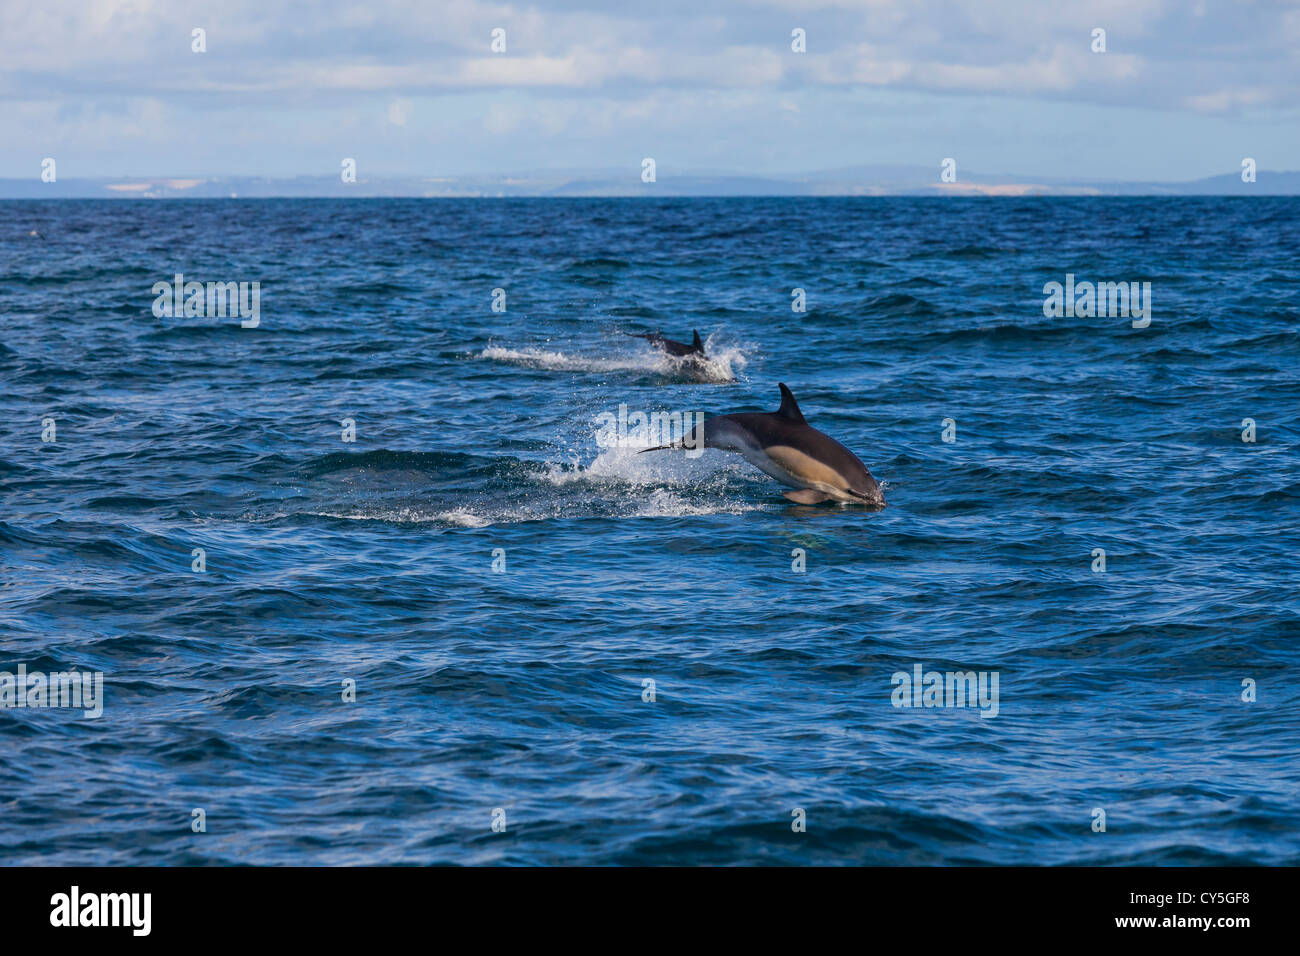 Dolphins jump as they follow boat. Stock Photo